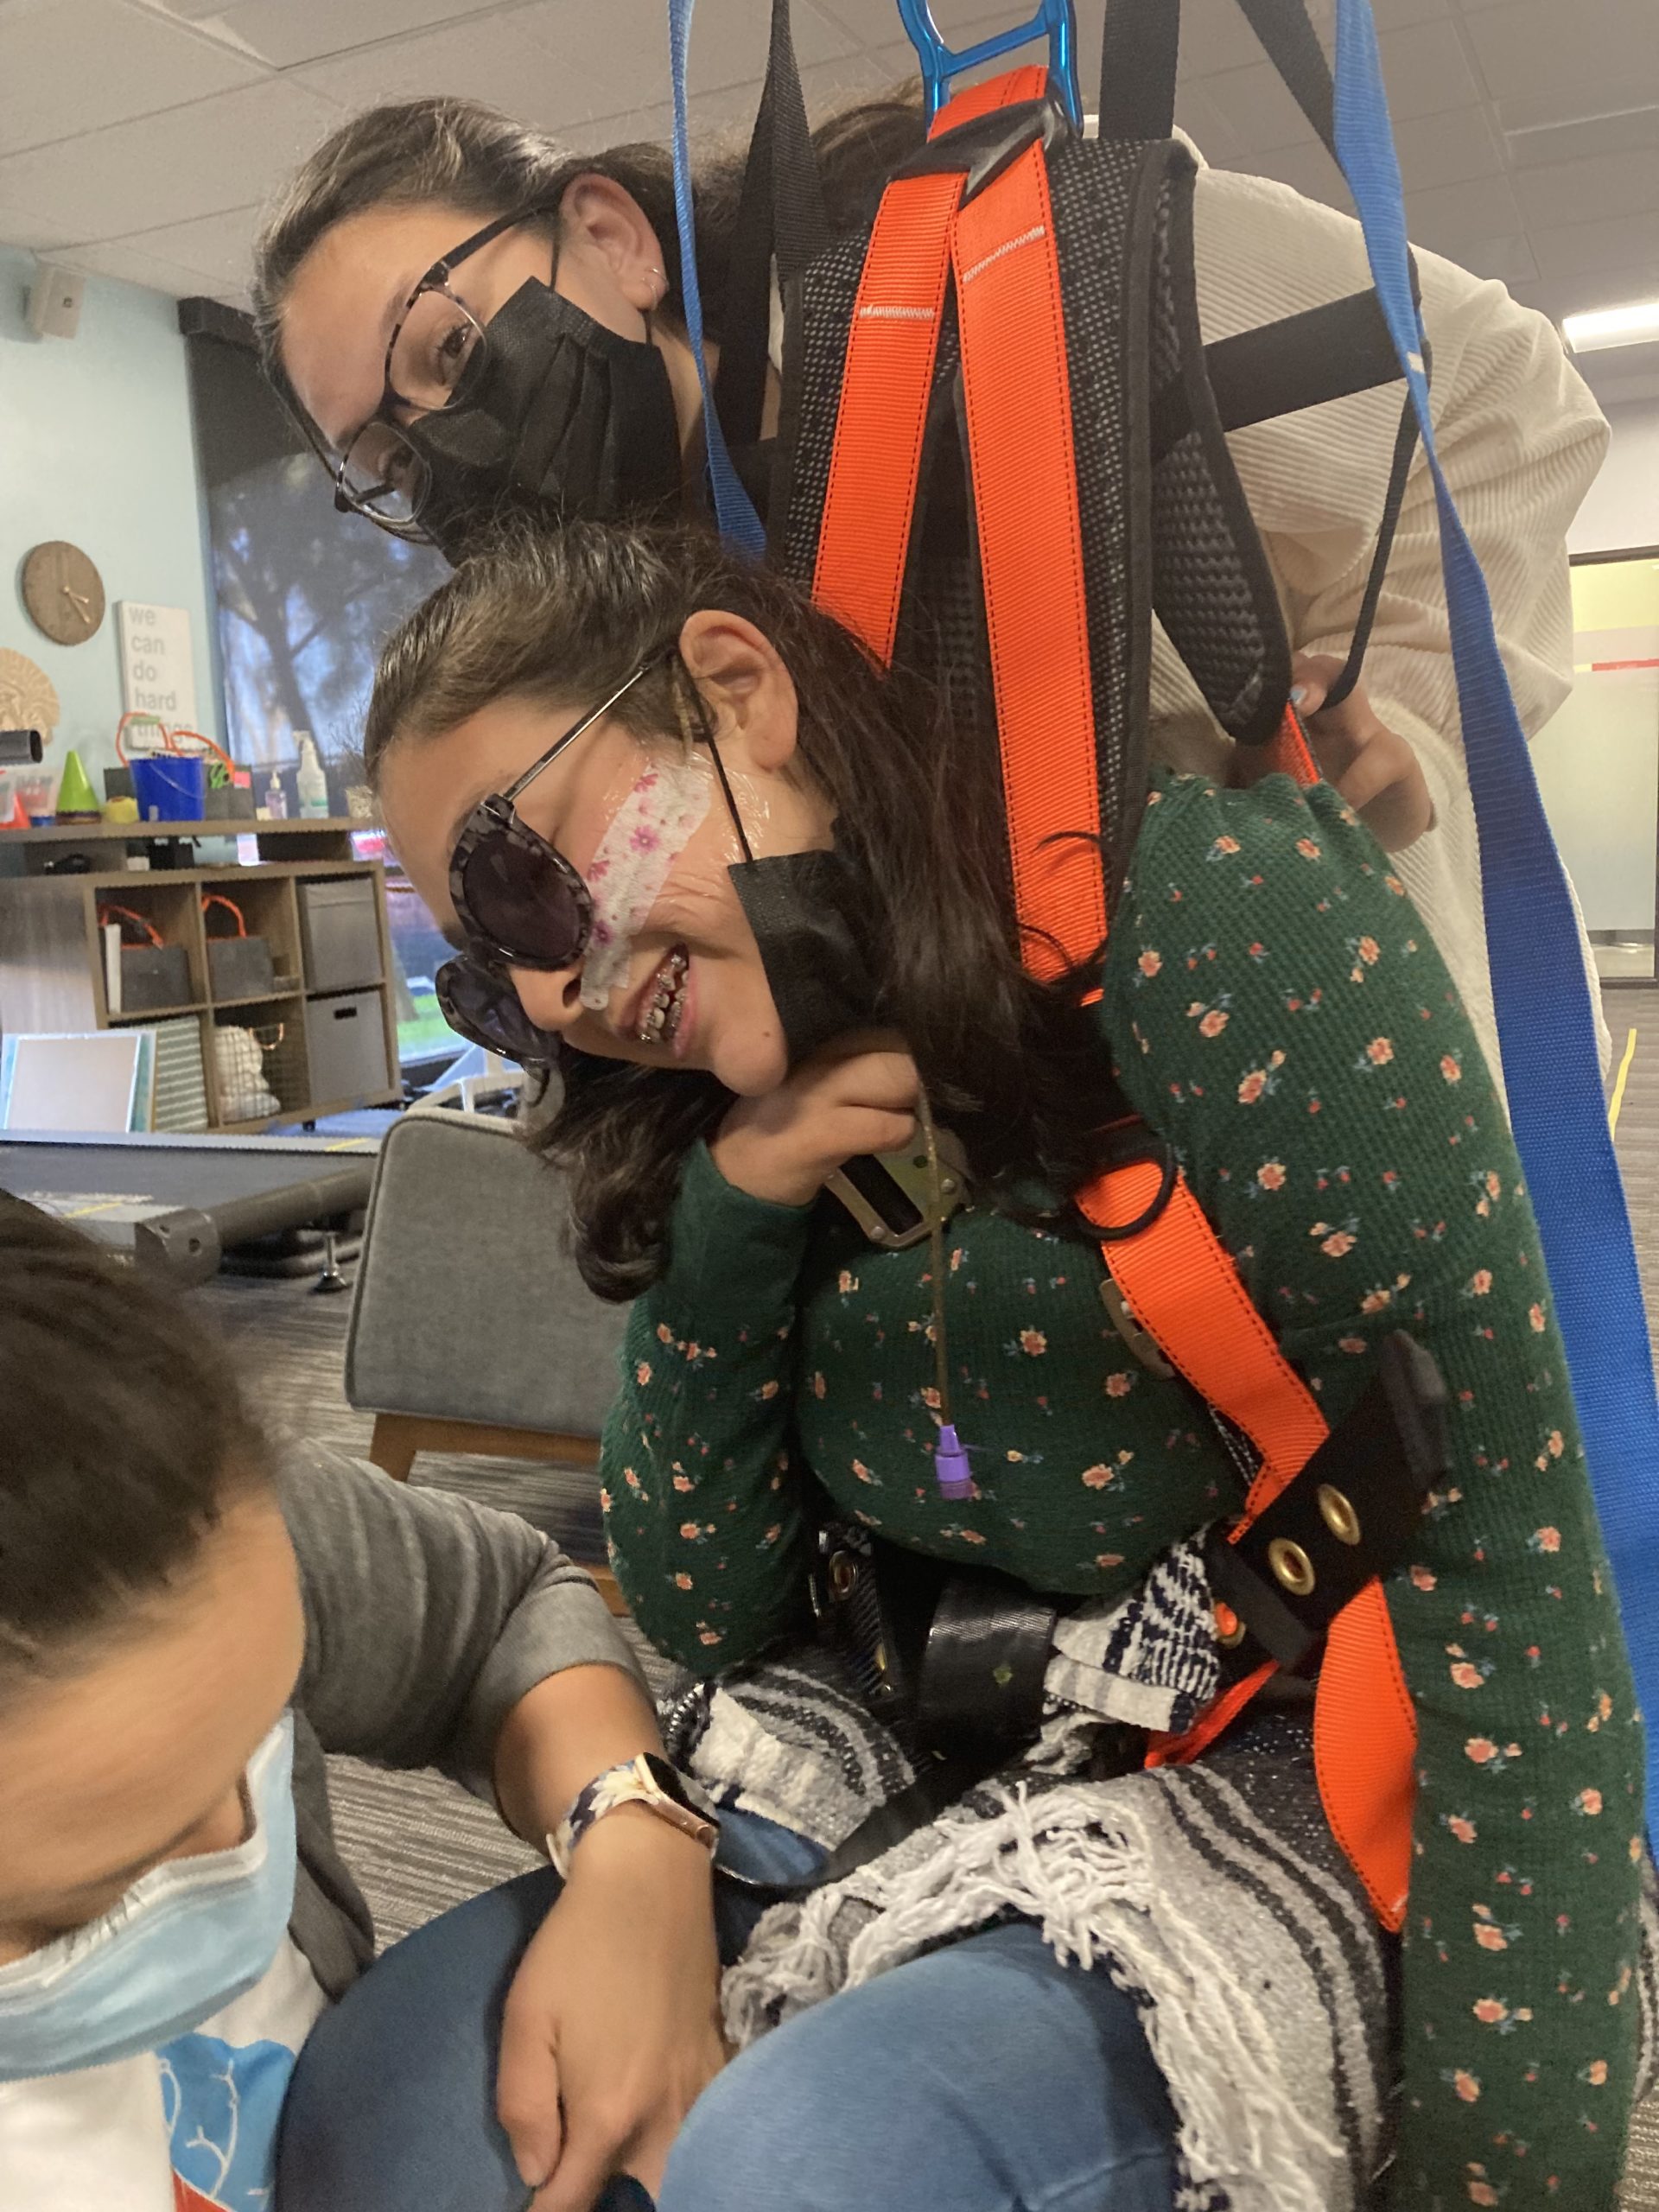 Bella Adlah works with a harness at Re+active Physical Therapy in California.